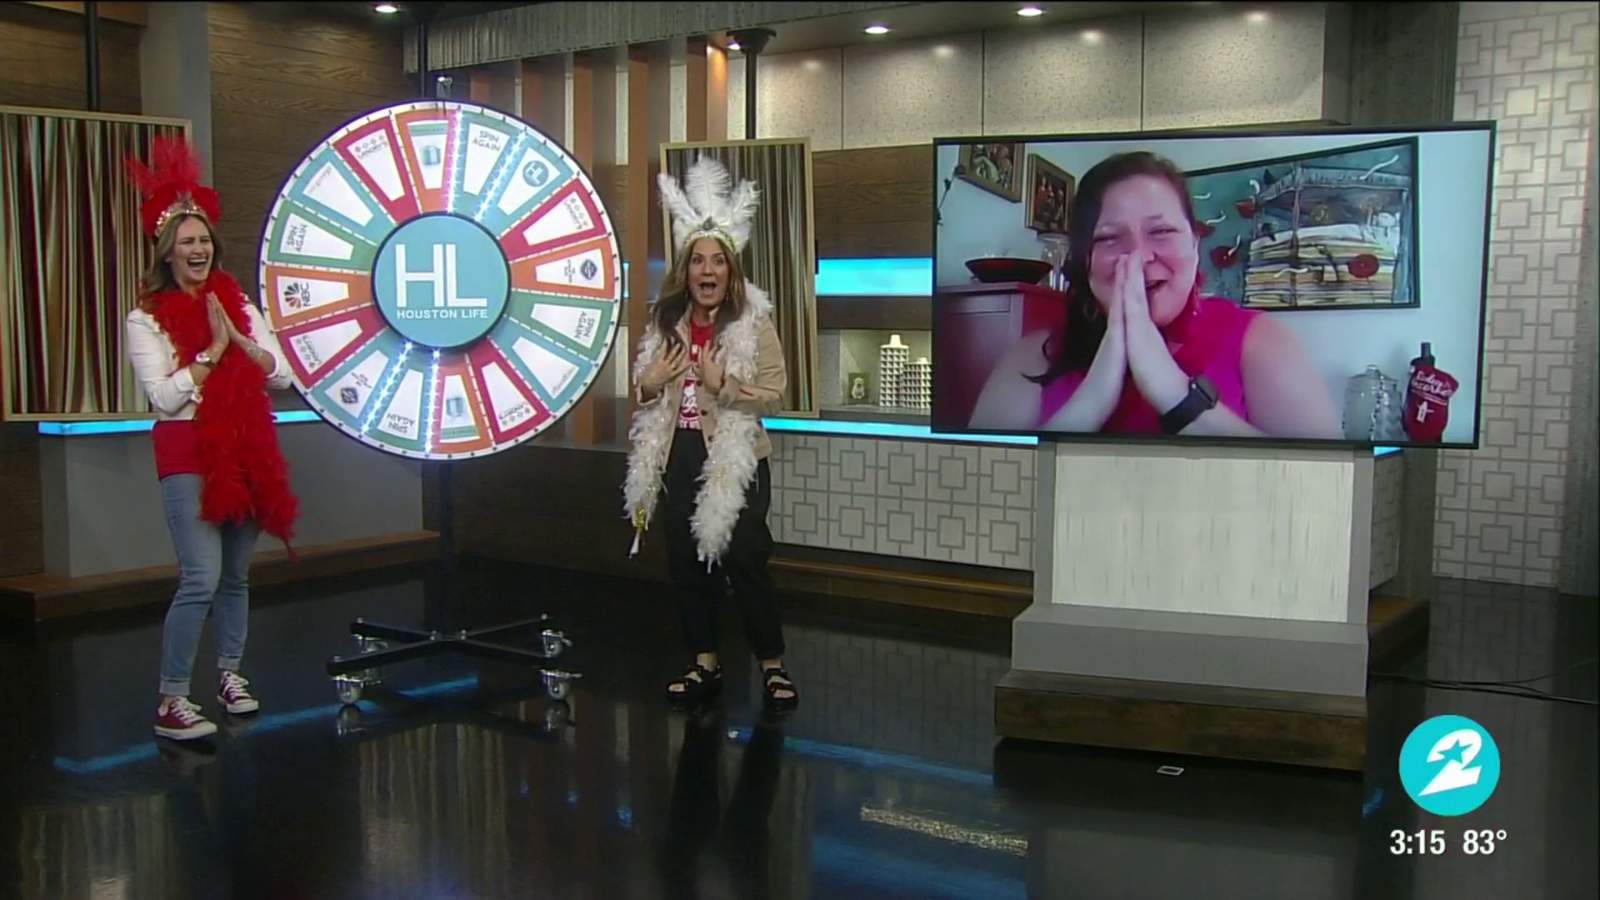 Check out today’s winner for the Houston Life Prize Wheel!